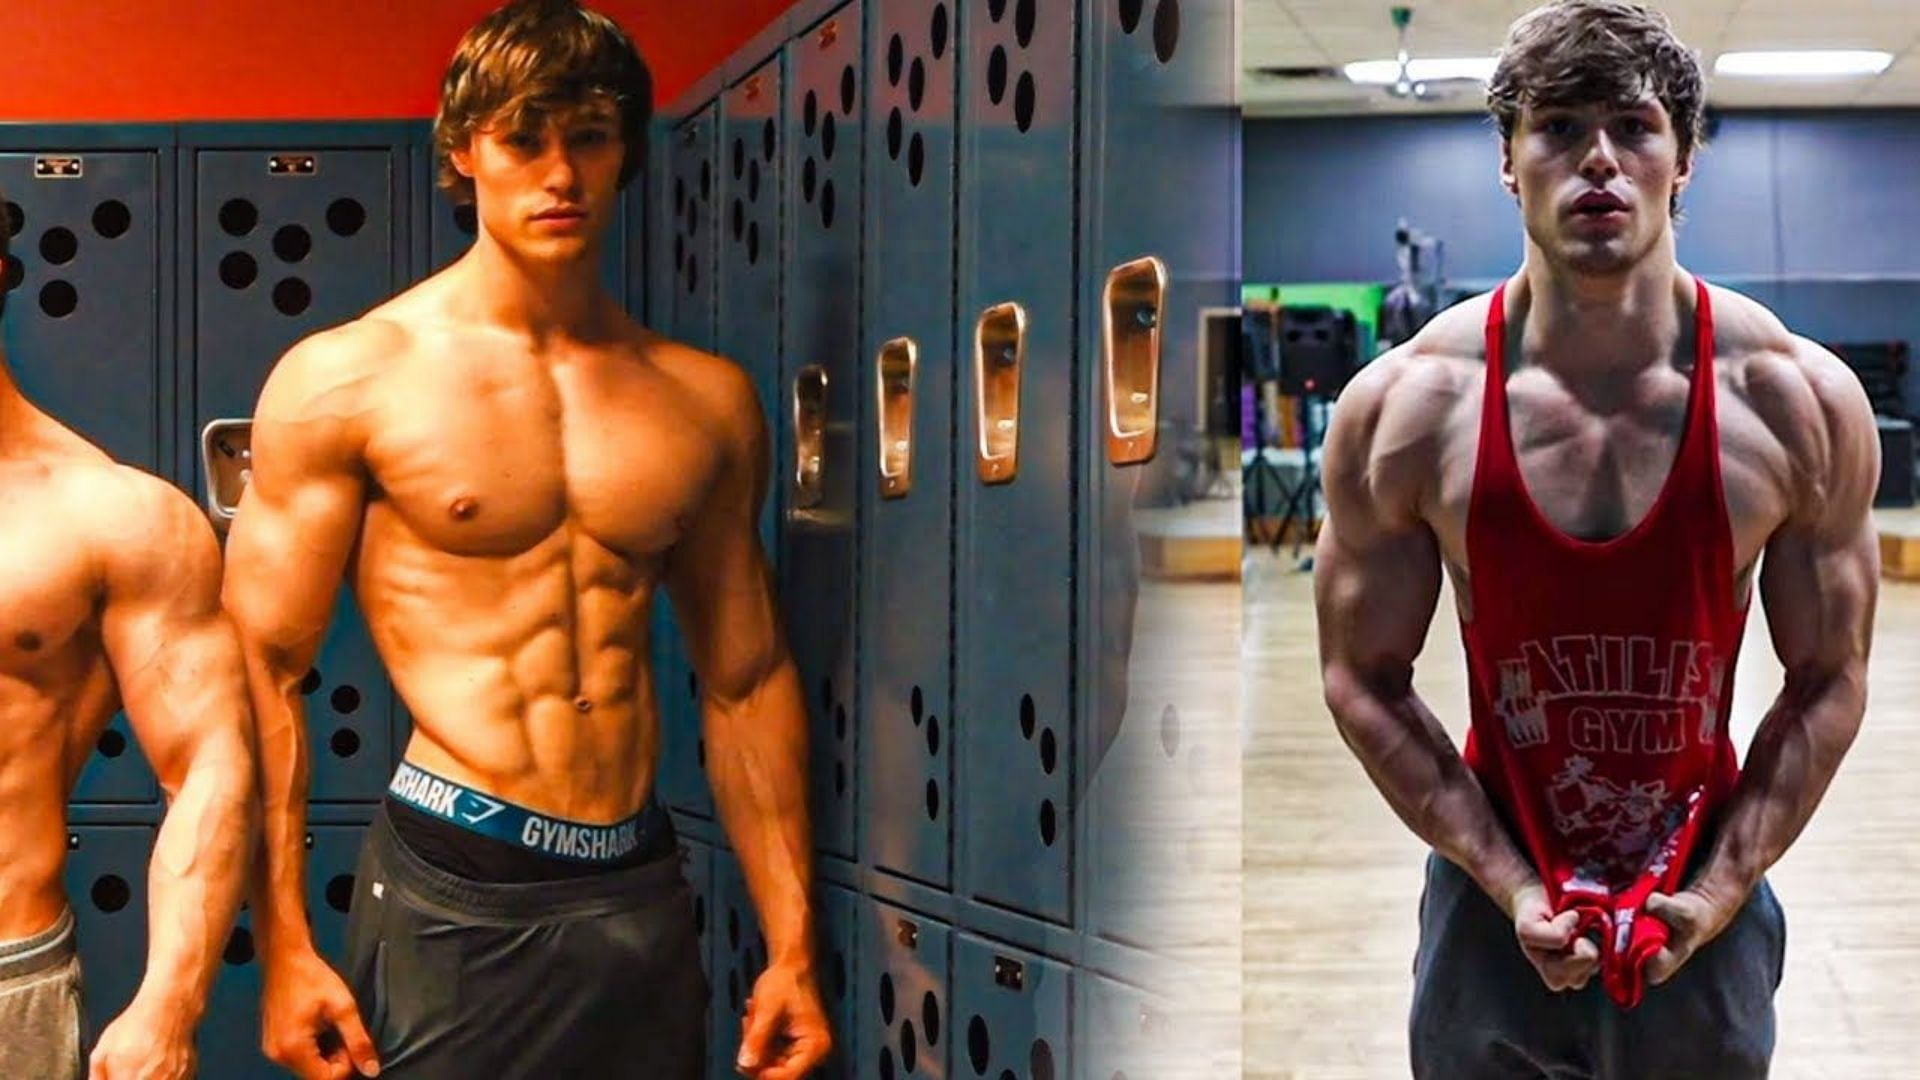 David Laid, Gymshark Athlete, trains like no other. Build your